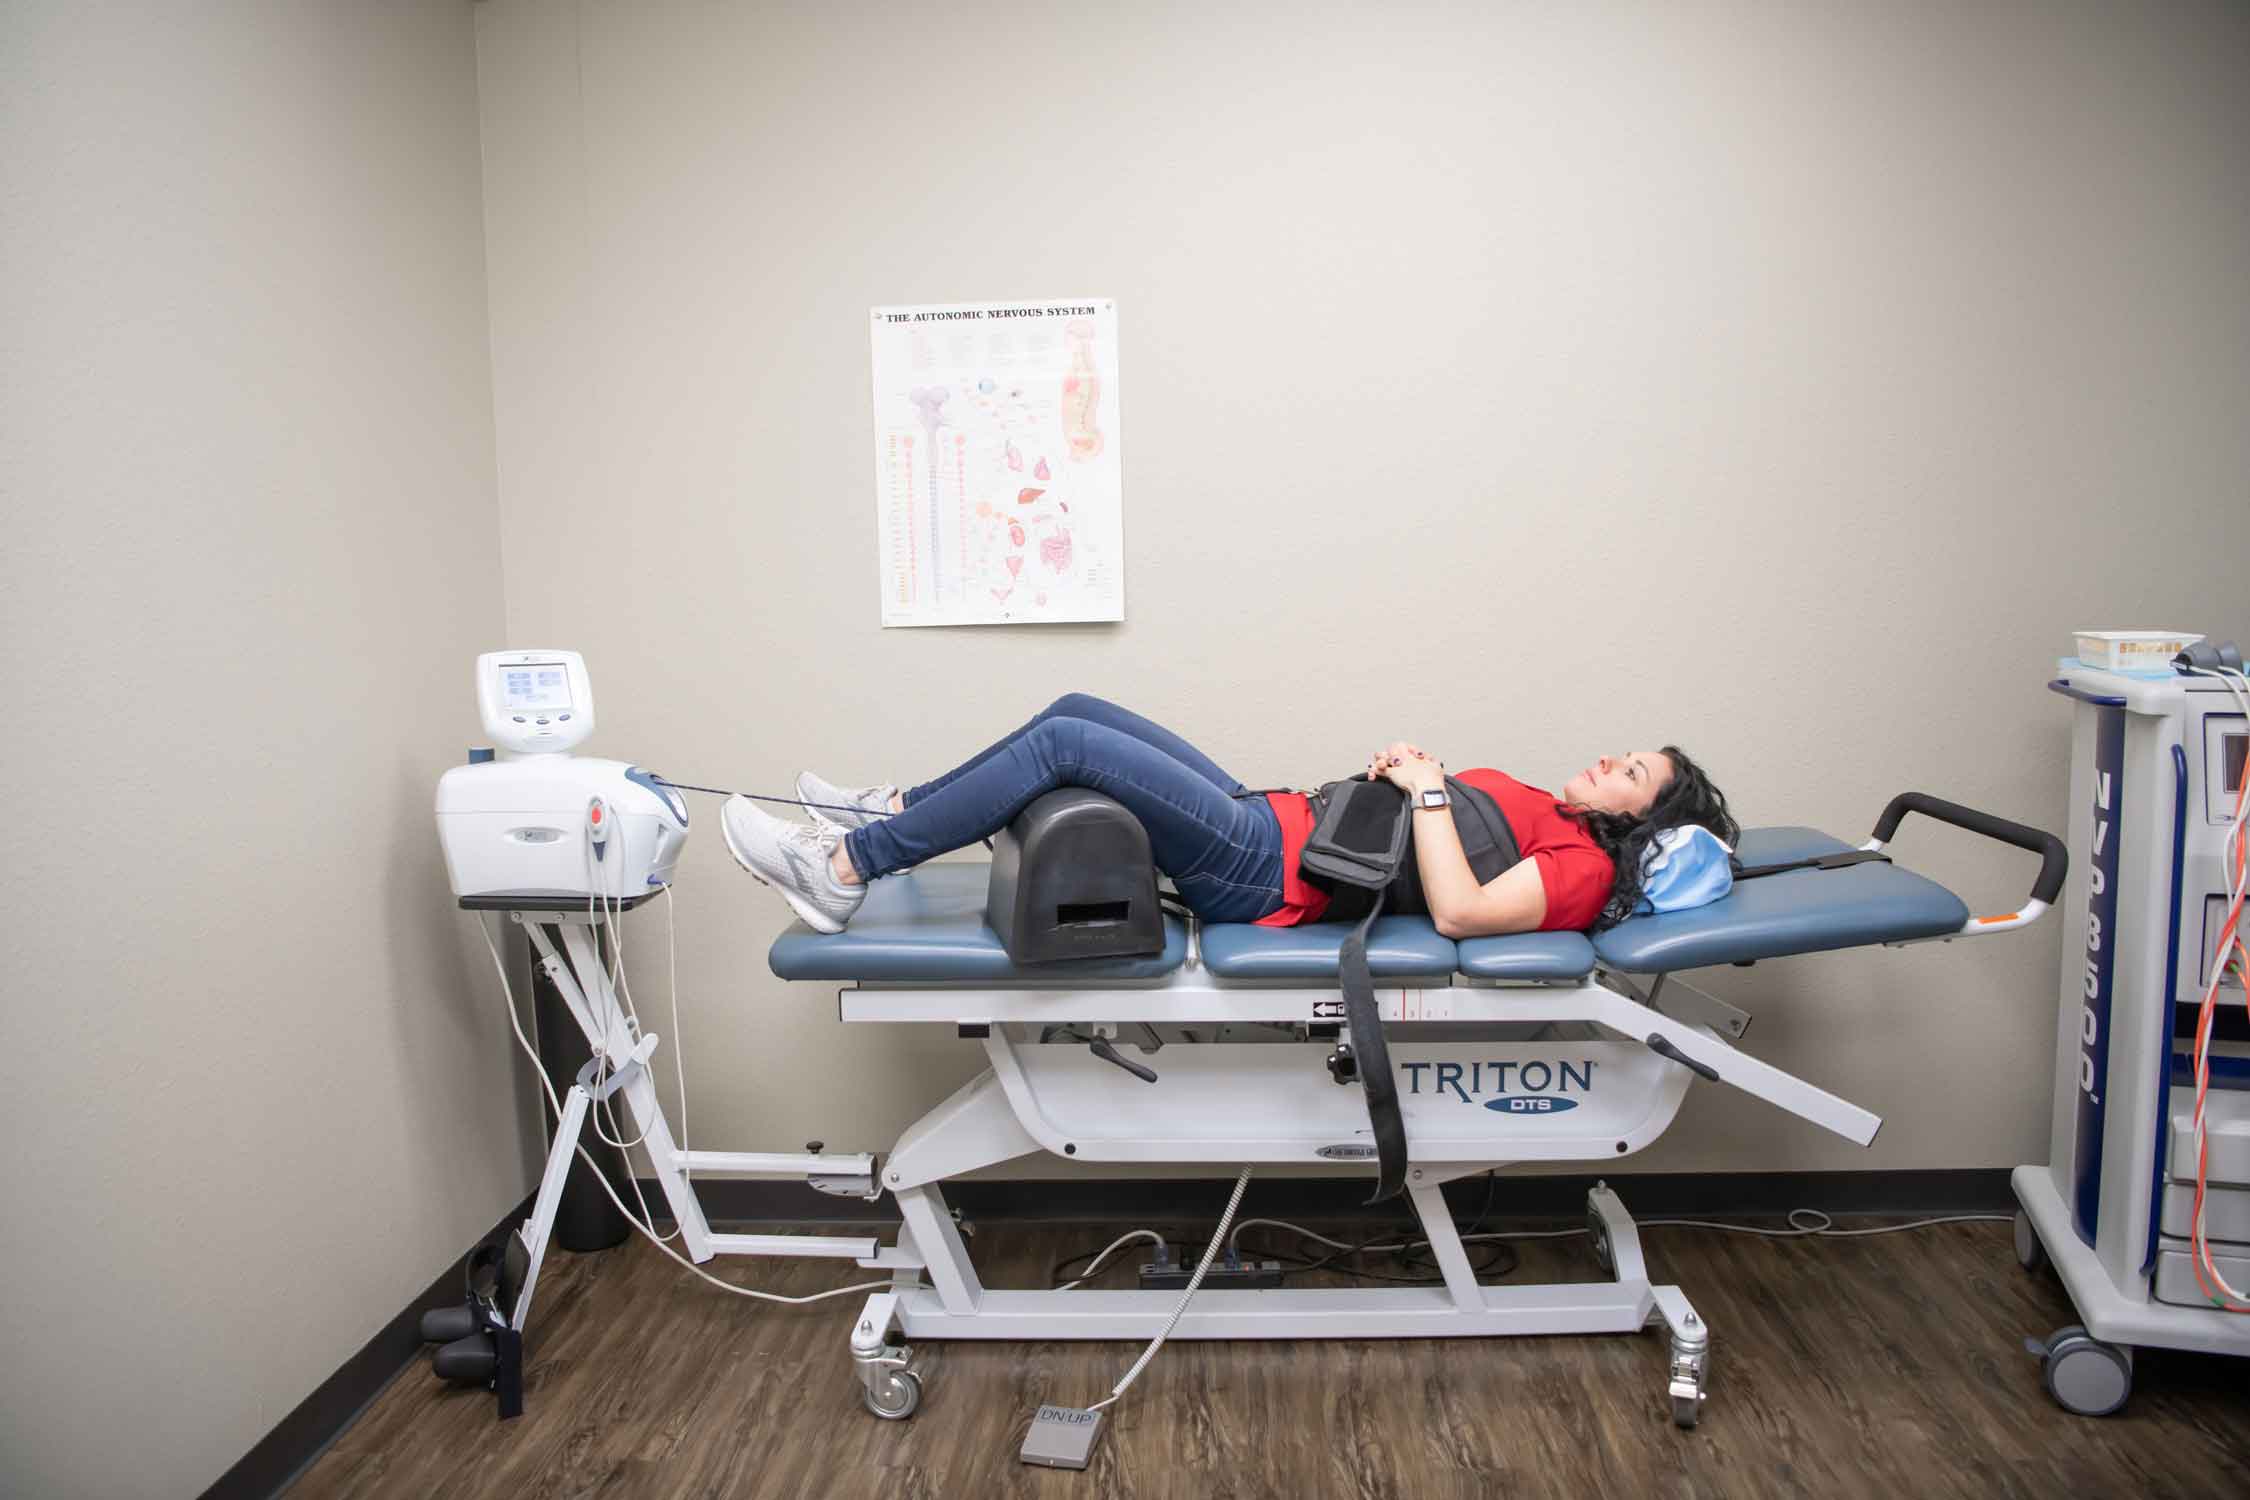 Non-surgical spinal decompression